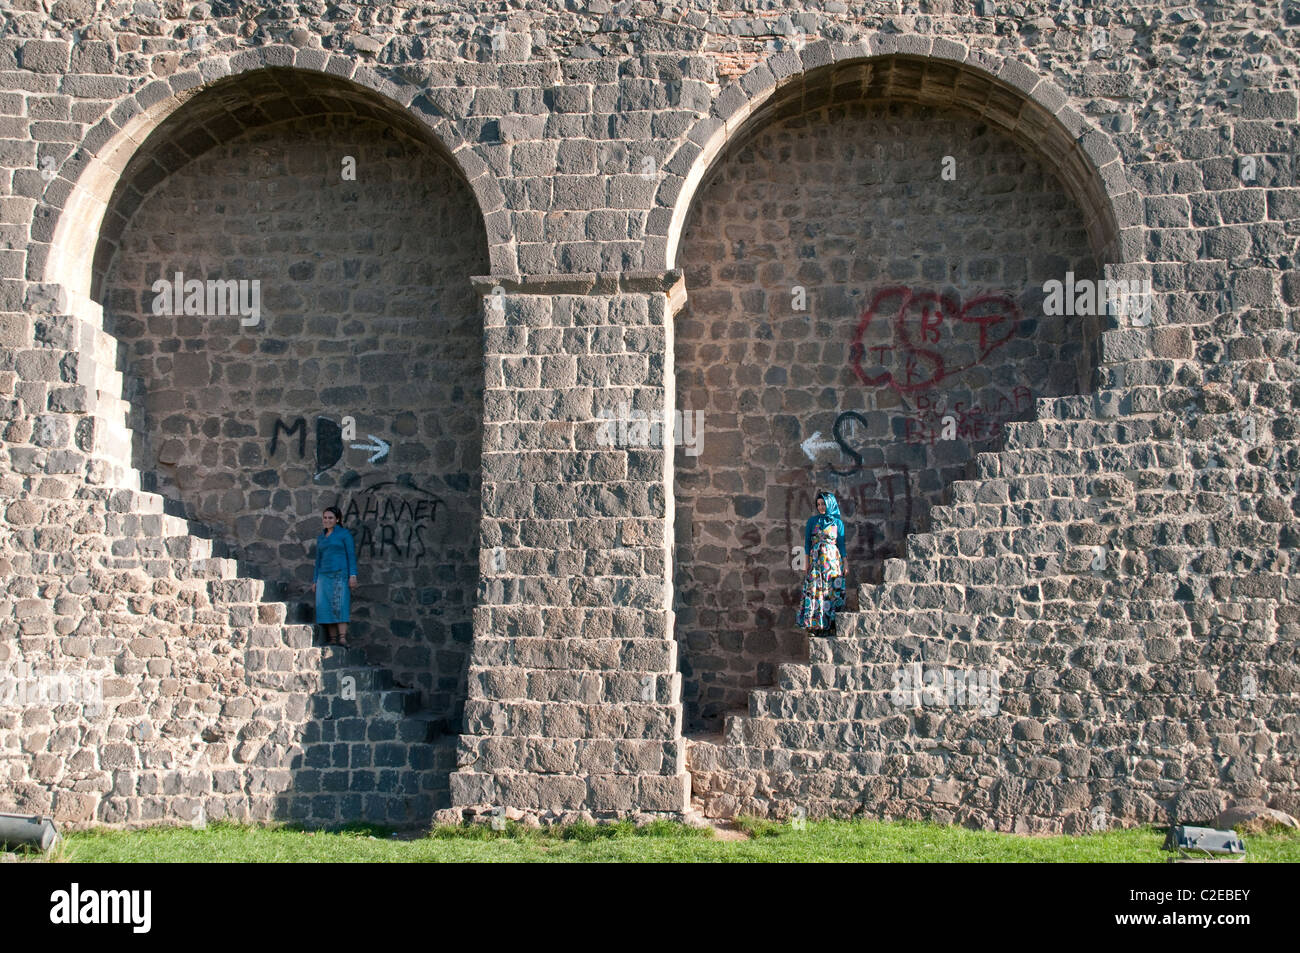 Two women stand in a heart-shaped niche in the old basalt fortress walls of the Kurdish city of Diyarbakir, in the eastern Anatolia region ofTurkey. Stock Photo